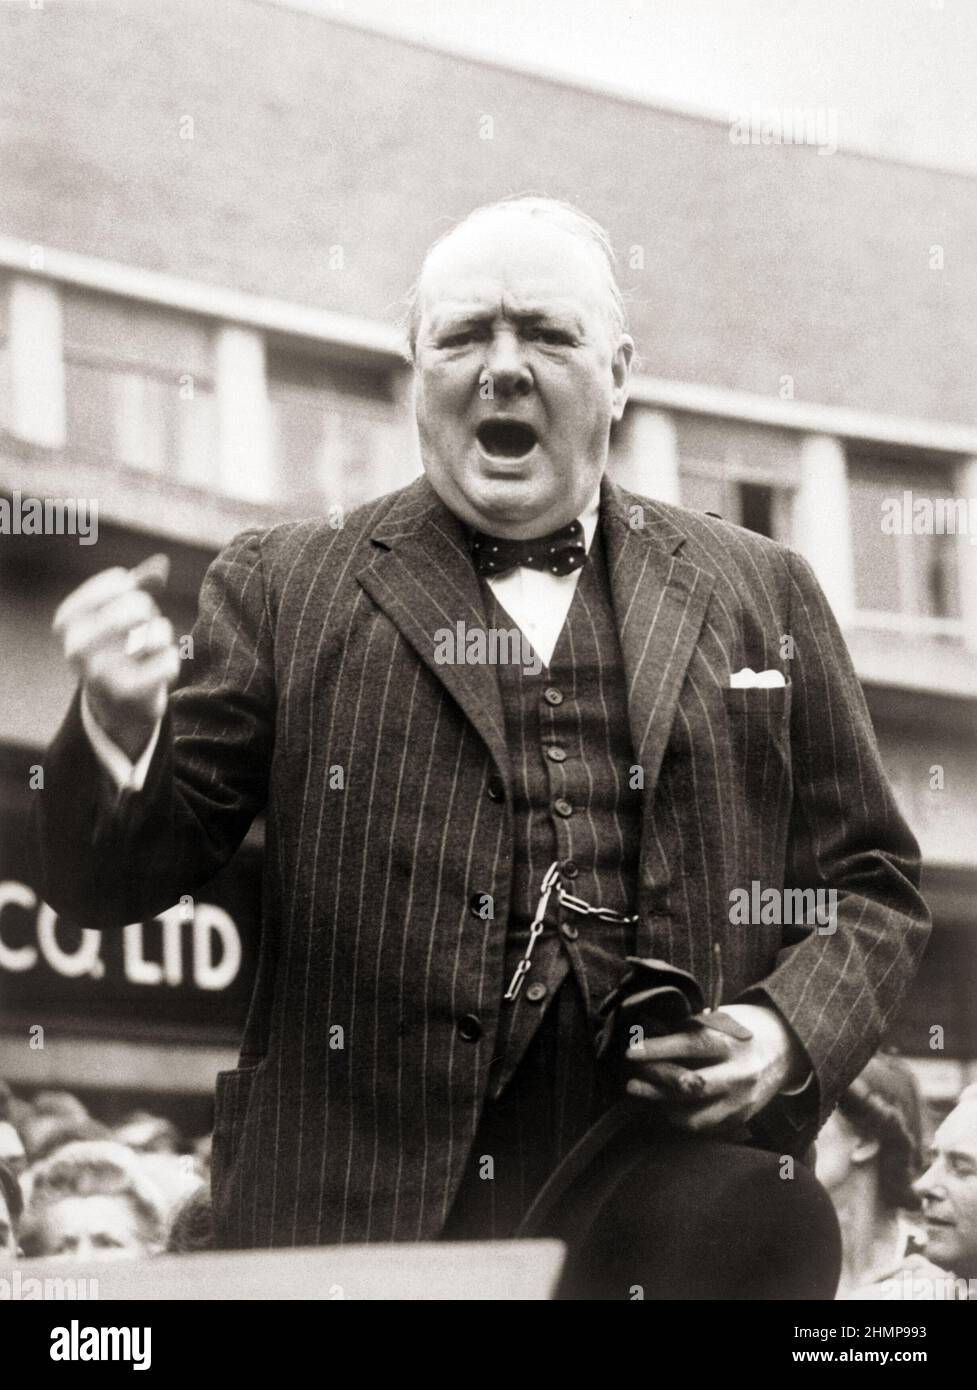 The Prime Minister Winston Churchill makes a speech in Uxbridge, Middlesex, during the general election campaign on 27 June 1945. Stock Photo